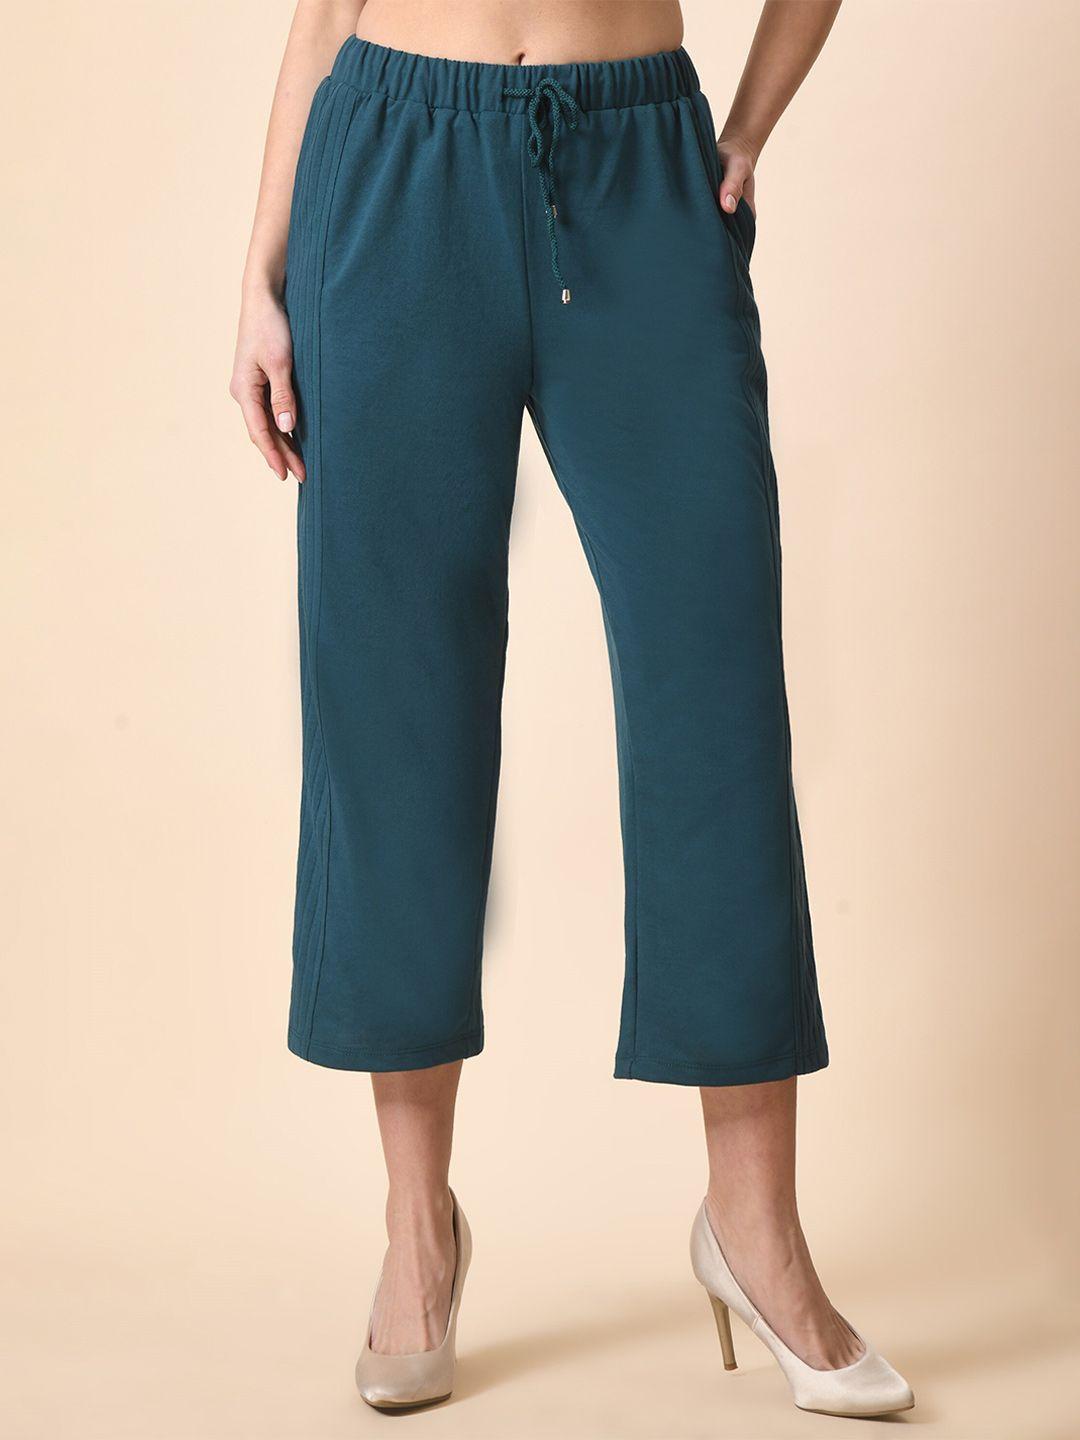 here&now teal green women three-fourth length pleated culottes trouser